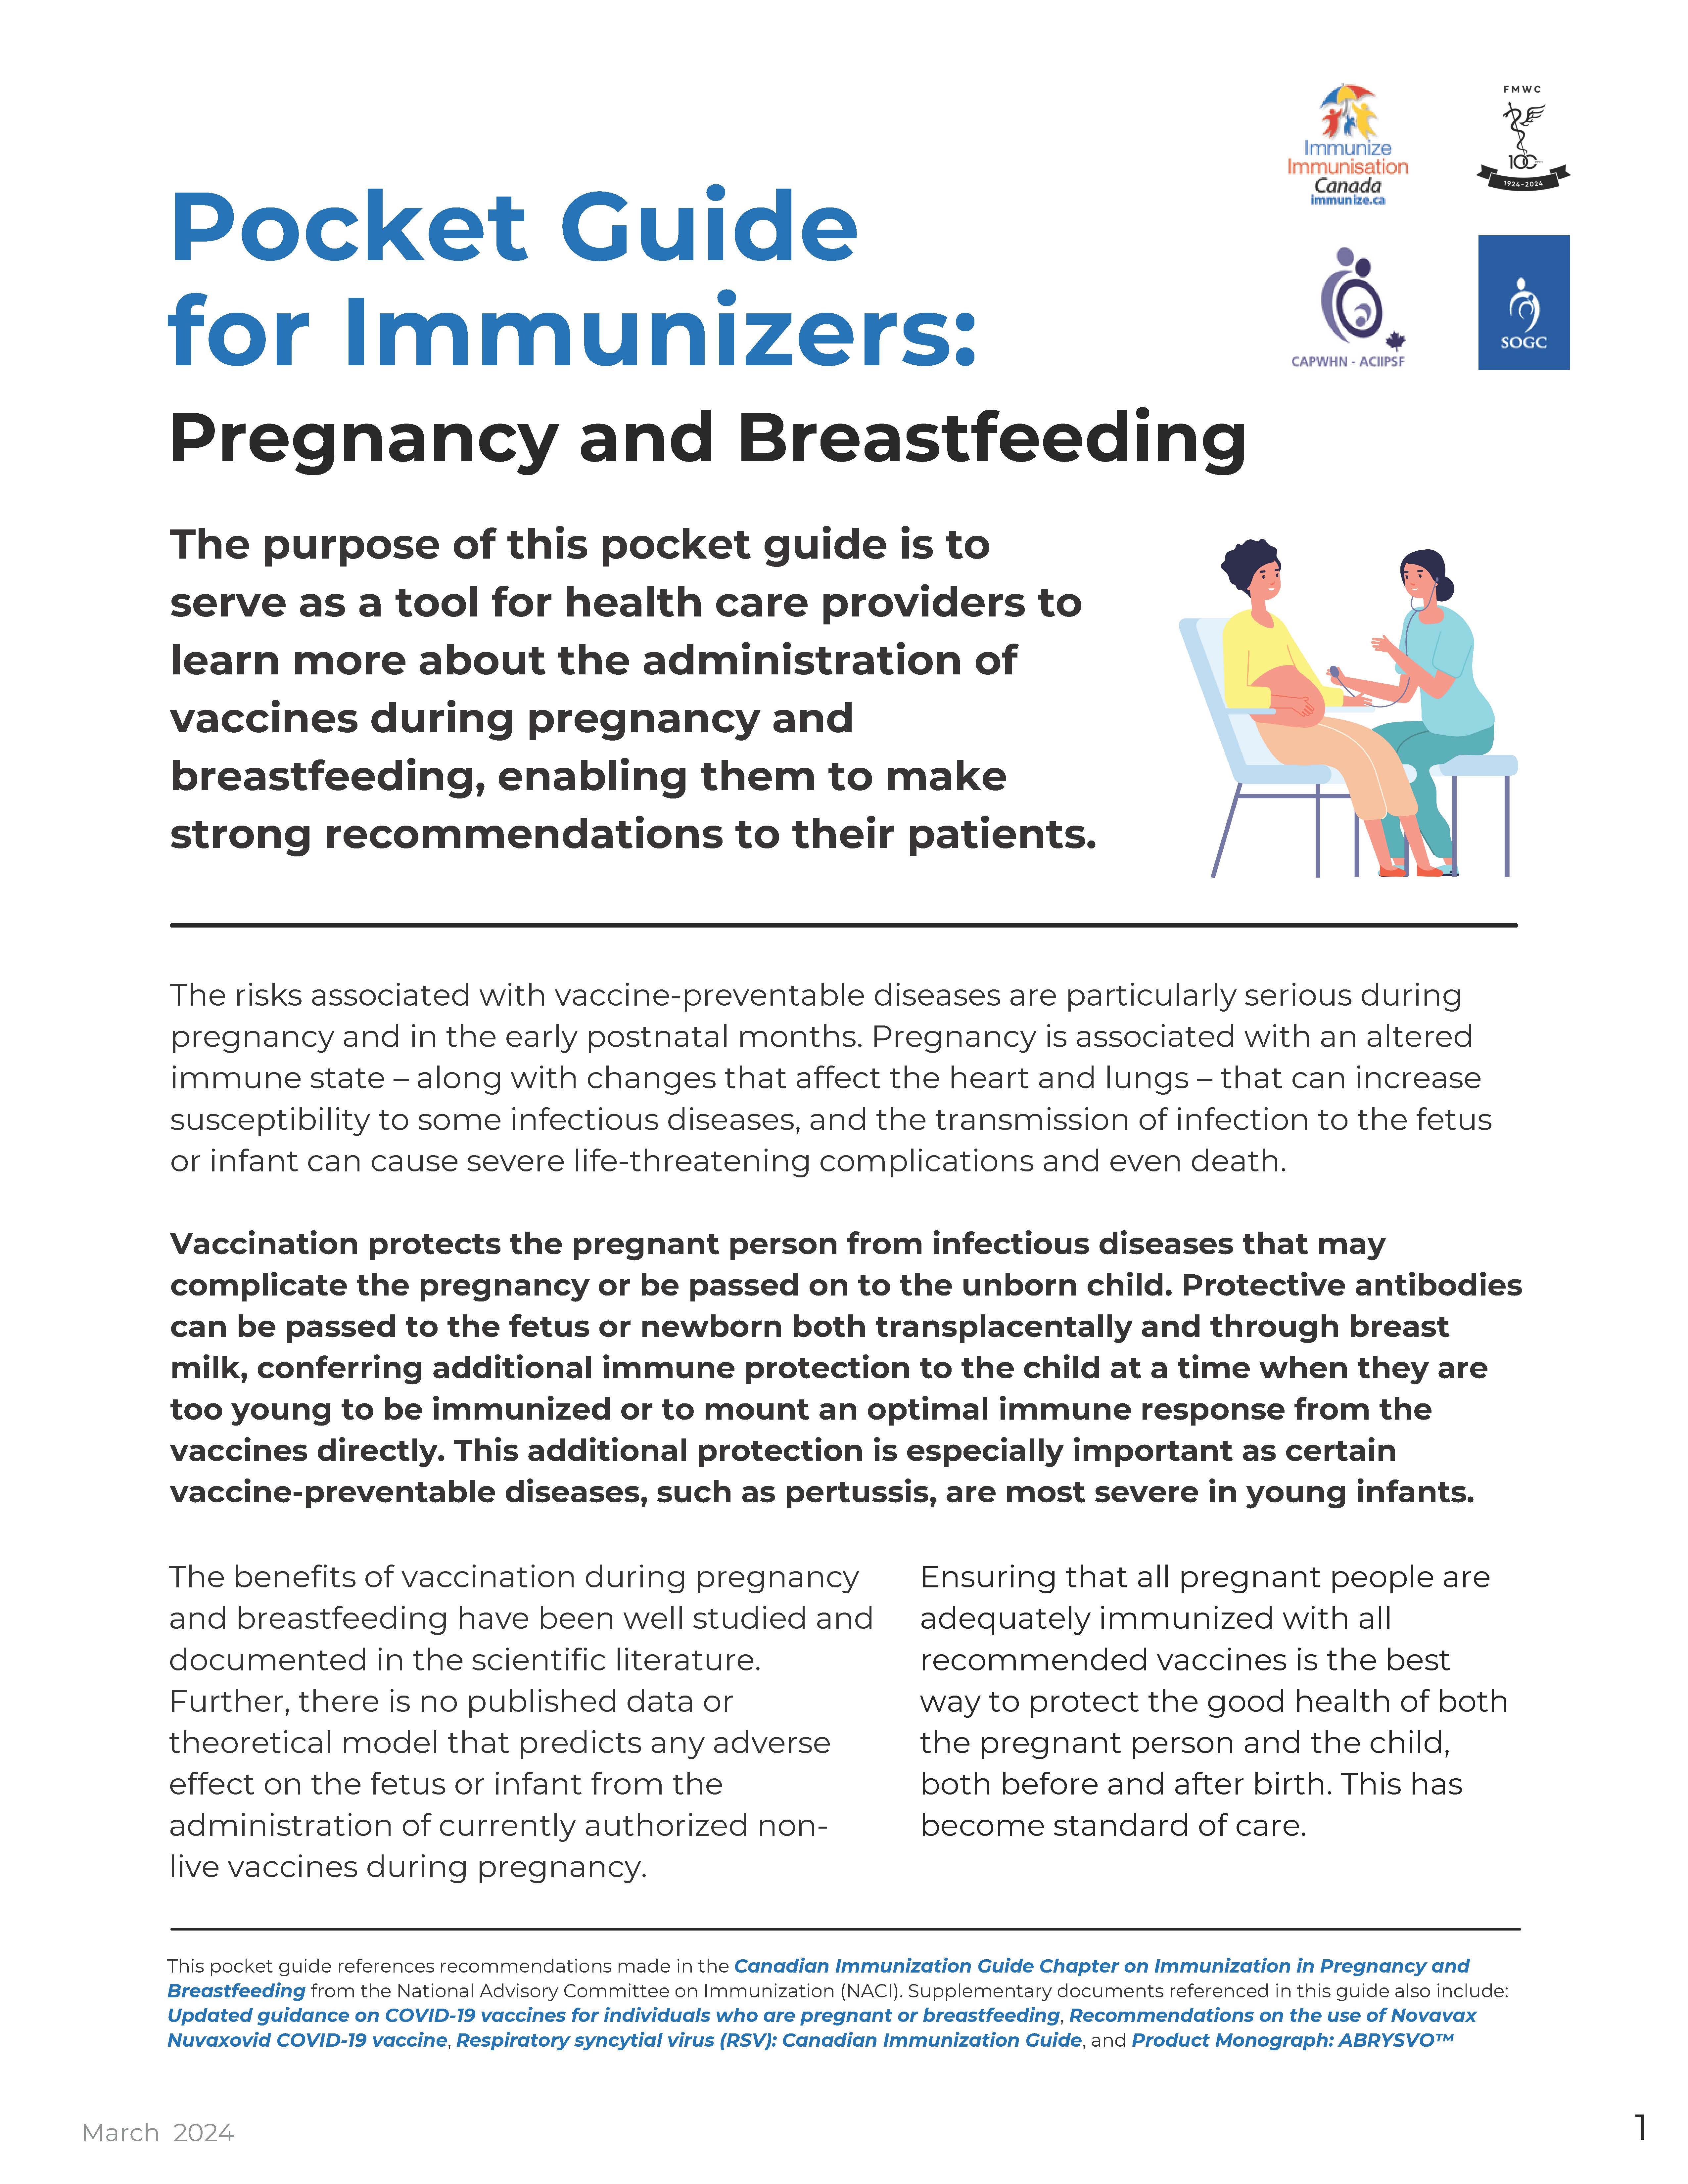 Pocket Guide for Immunizers: Pregnancy and Breastfeeding